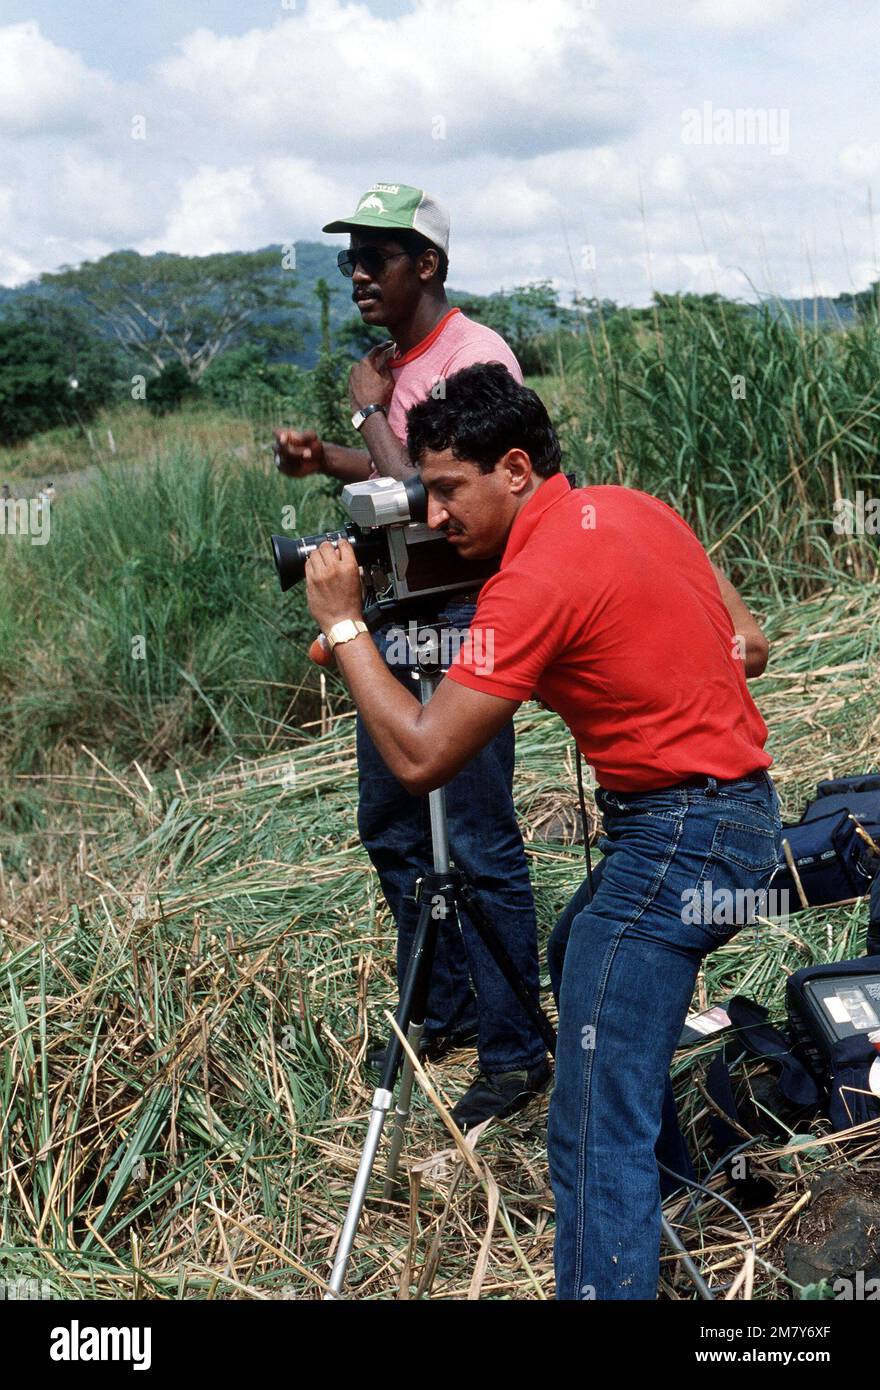 SPECIALIST Fourth Class Ivan Blanco, a television production specialist, videotapes a mass casualty simulation exercise while Claudio Hawkins assists. Base: Howard Air Force Base Country: Panama (PAN) Stock Photo